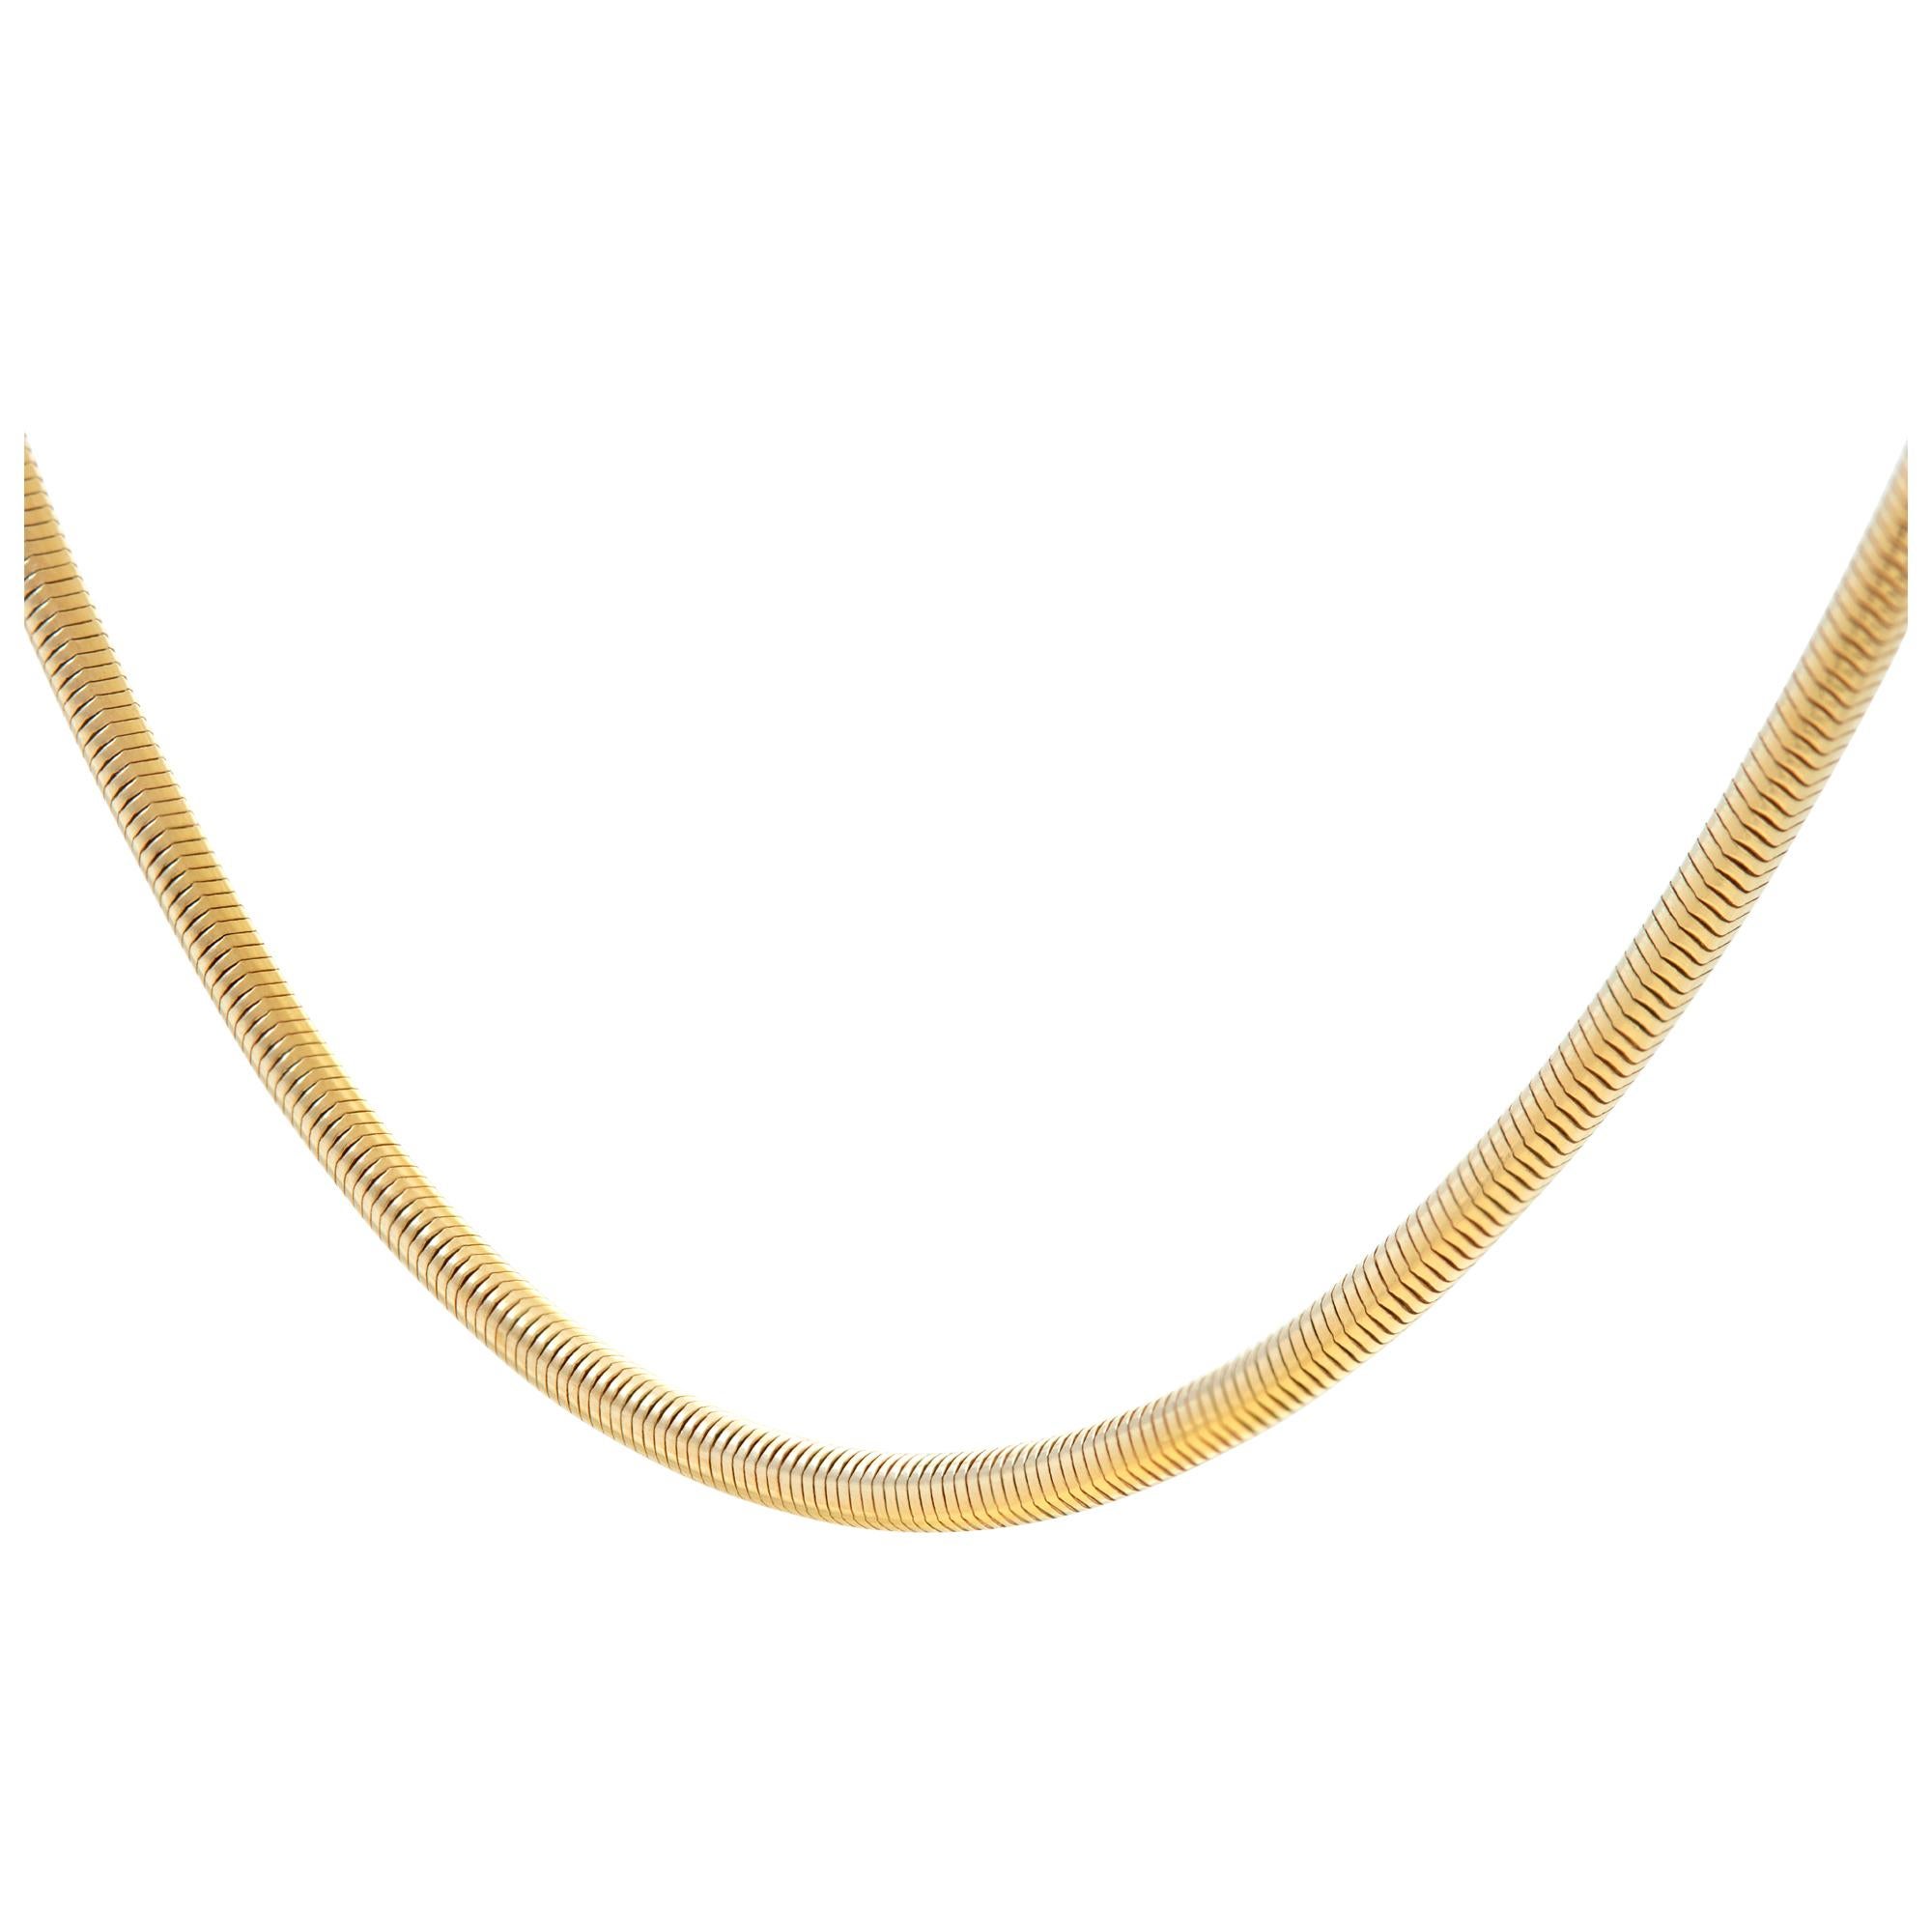 Thin 18k yellow gold snake chain Length 16.5 inches. Width 1.8mm.
